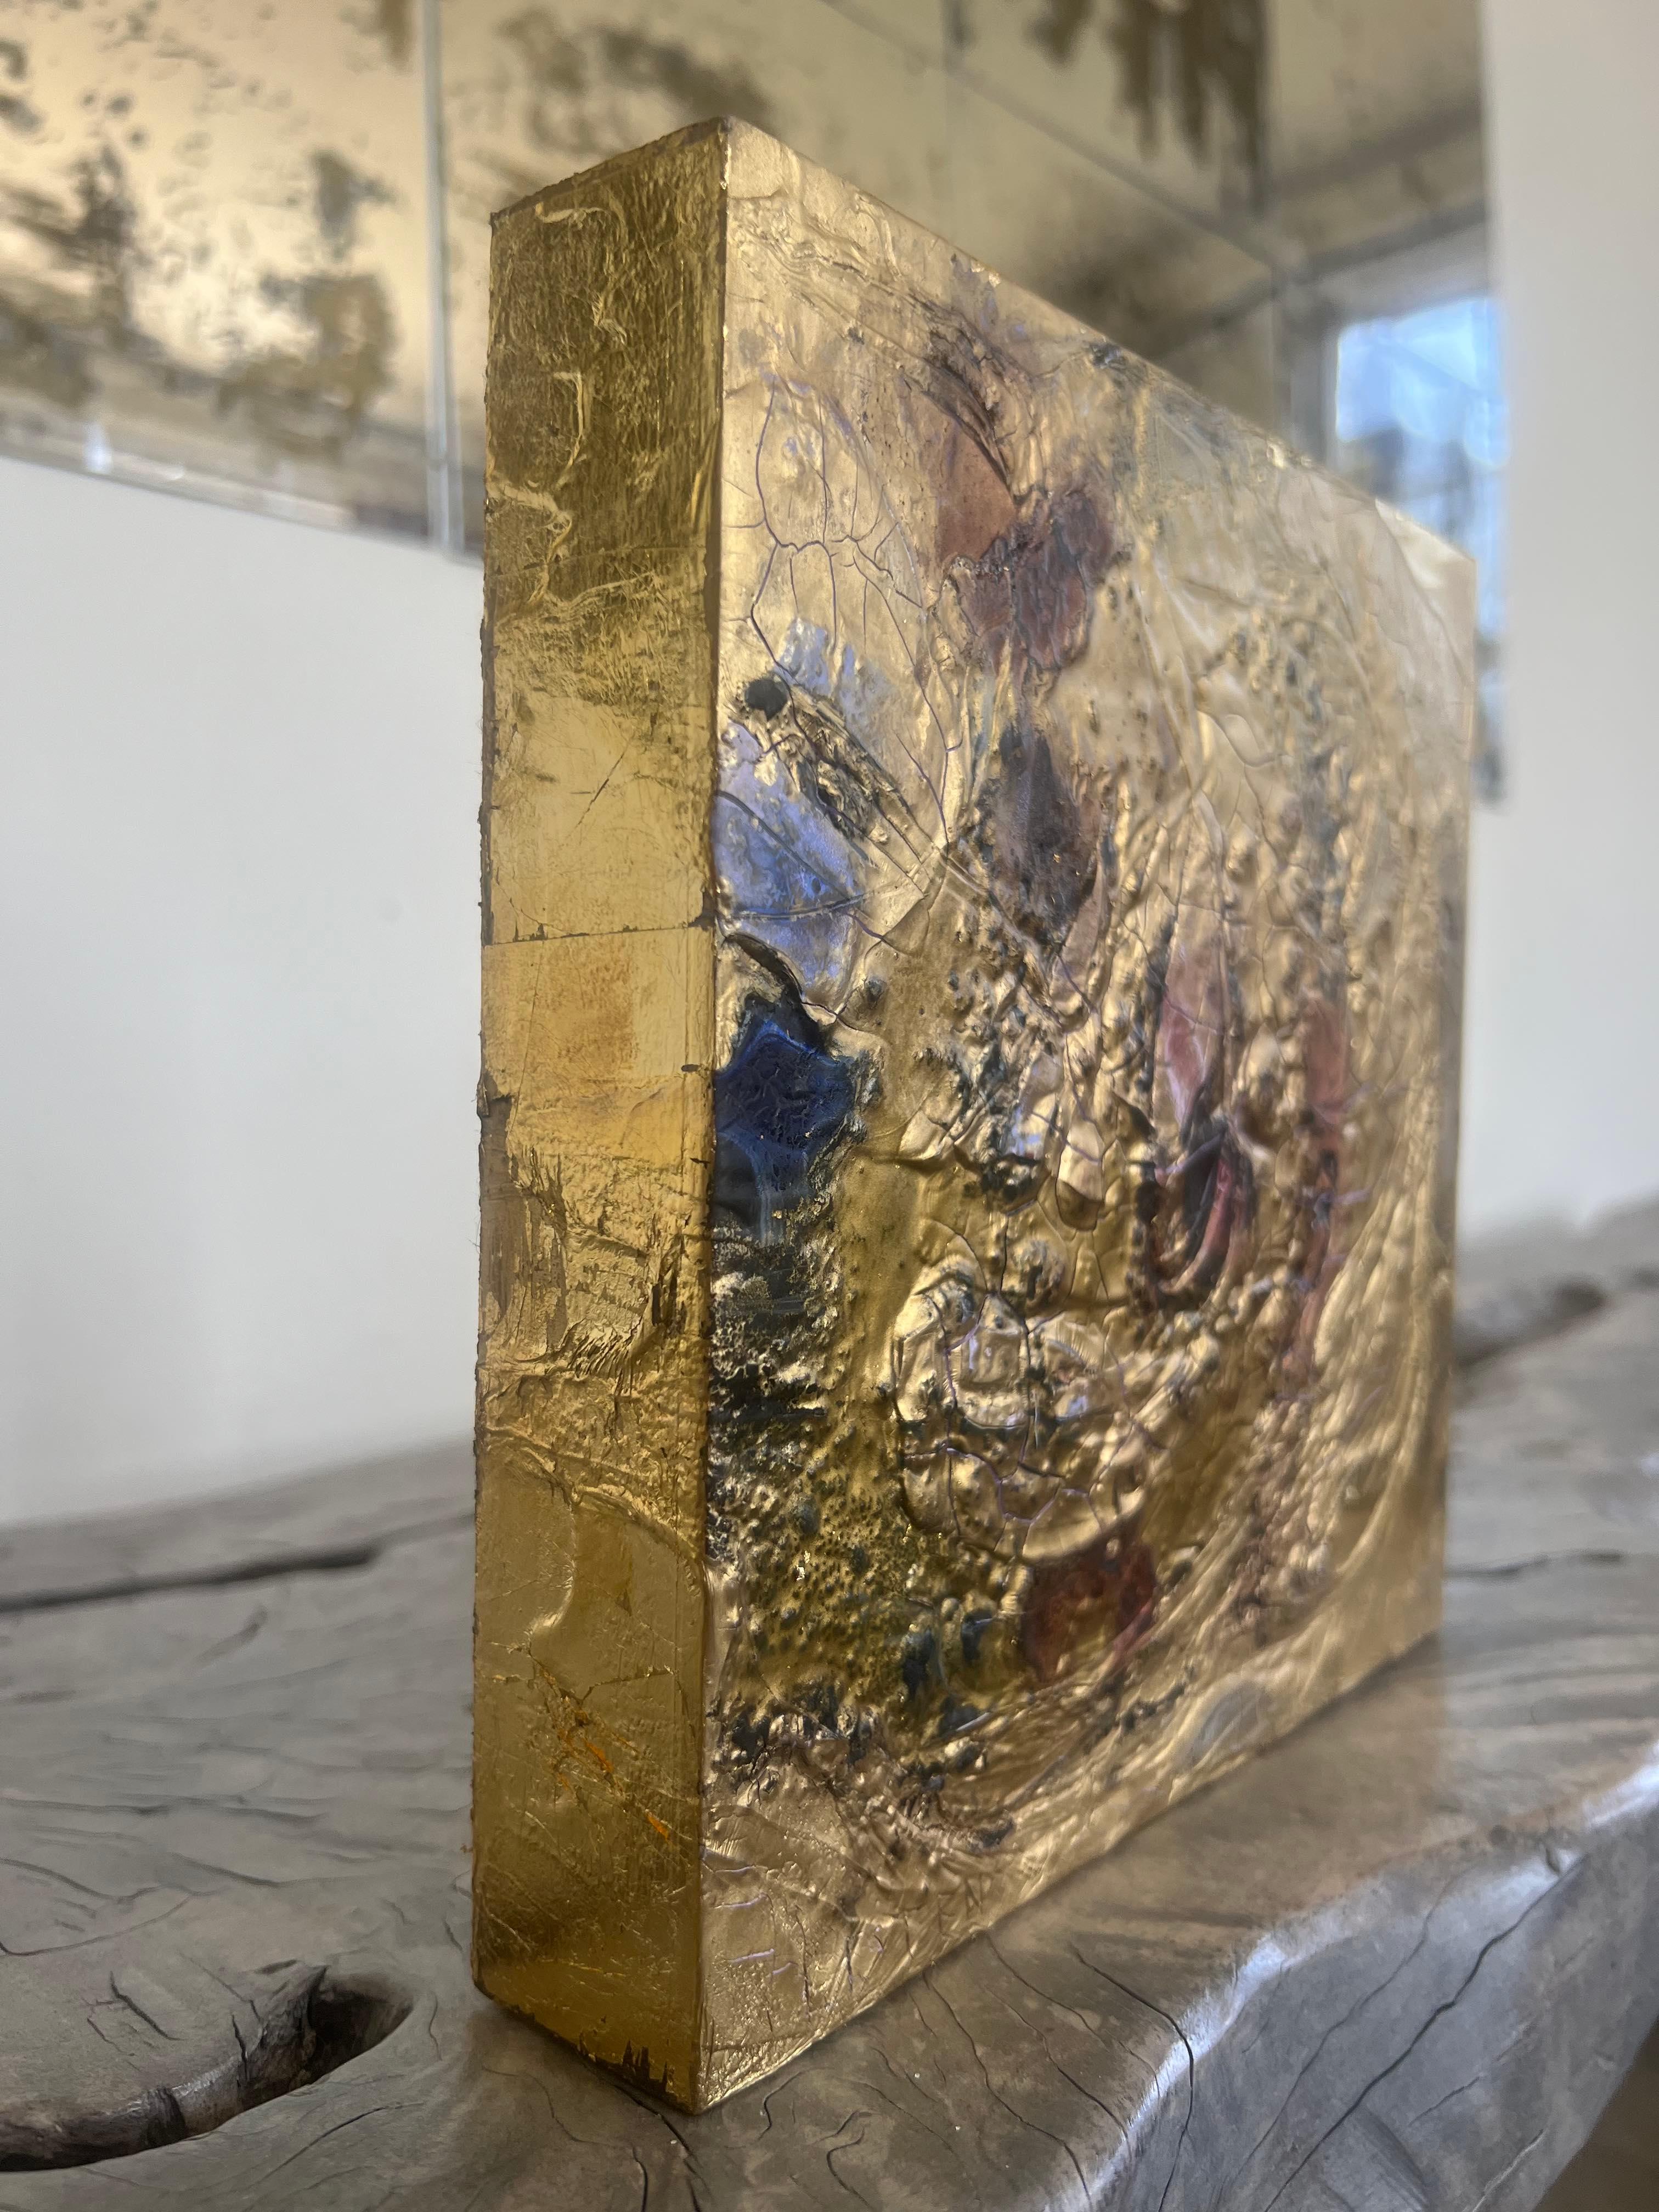 This piece is part of the Amrta Gold Series. These pieces are incredibly unique and cannot be replicated. The are multilayered mixed media abstracts all with 24k gold leaf on top. The layers are danced, dripped, and splattered onto wood panels to